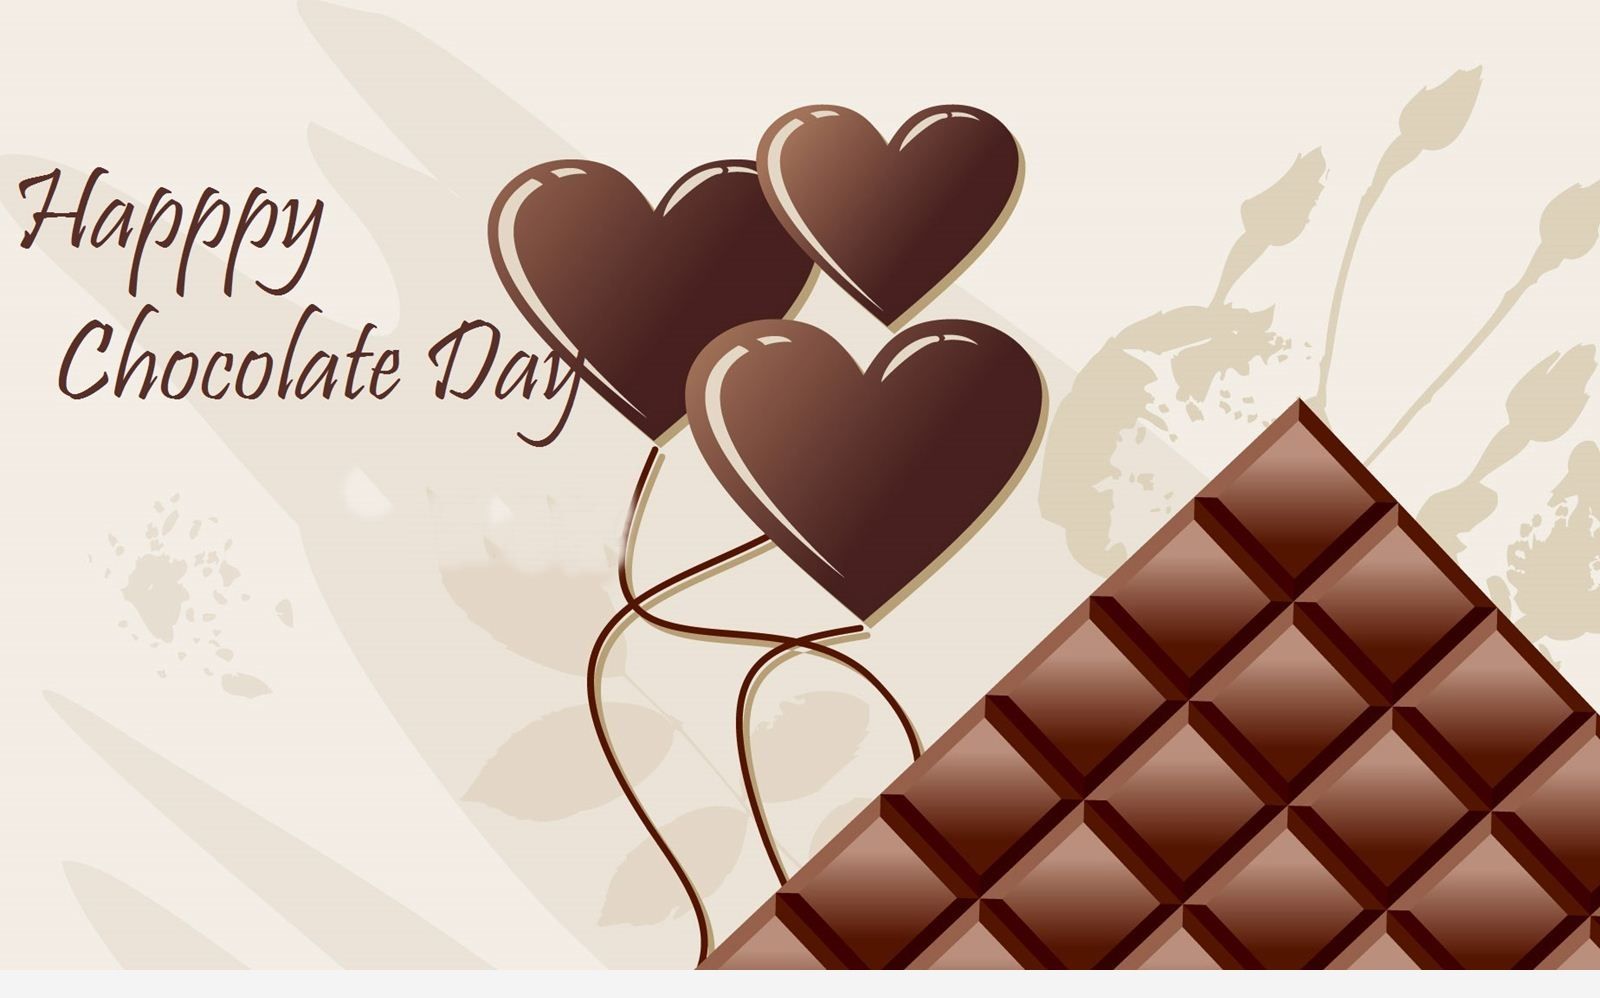 Happy Chocolate Day 2019 - HD Wallpaper 